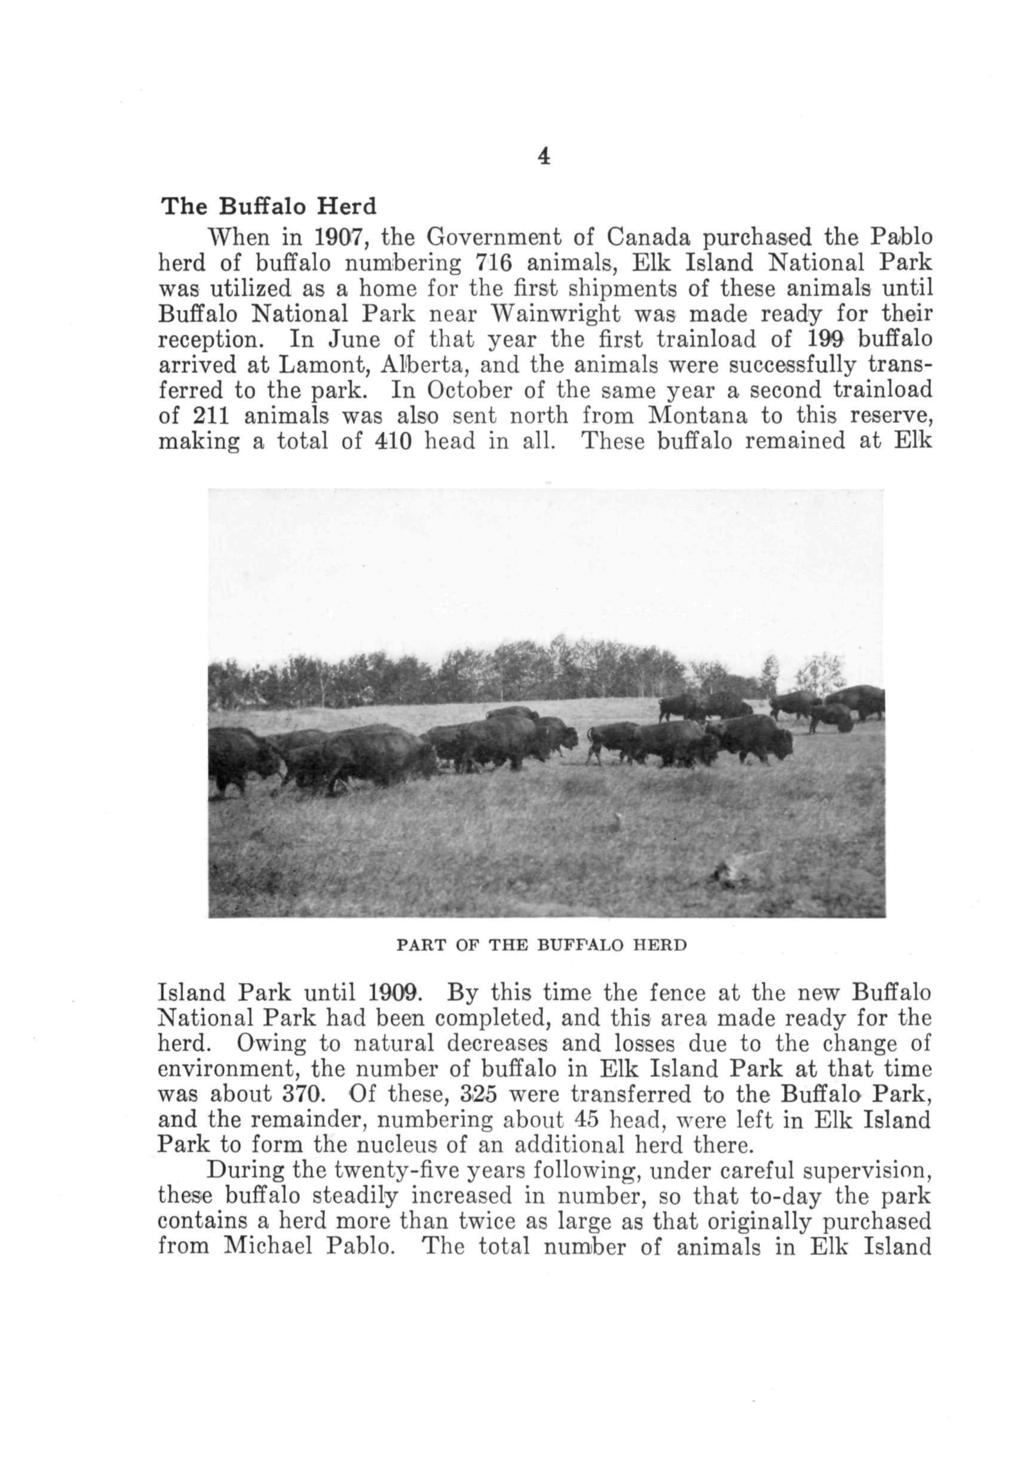 4 The Buffalo Herd When in 1907, the Government of Canada purchased the Pablo herd of buffalo numbering 716 animals, Elk Island National Park was utilized as a home for the first shipments of these